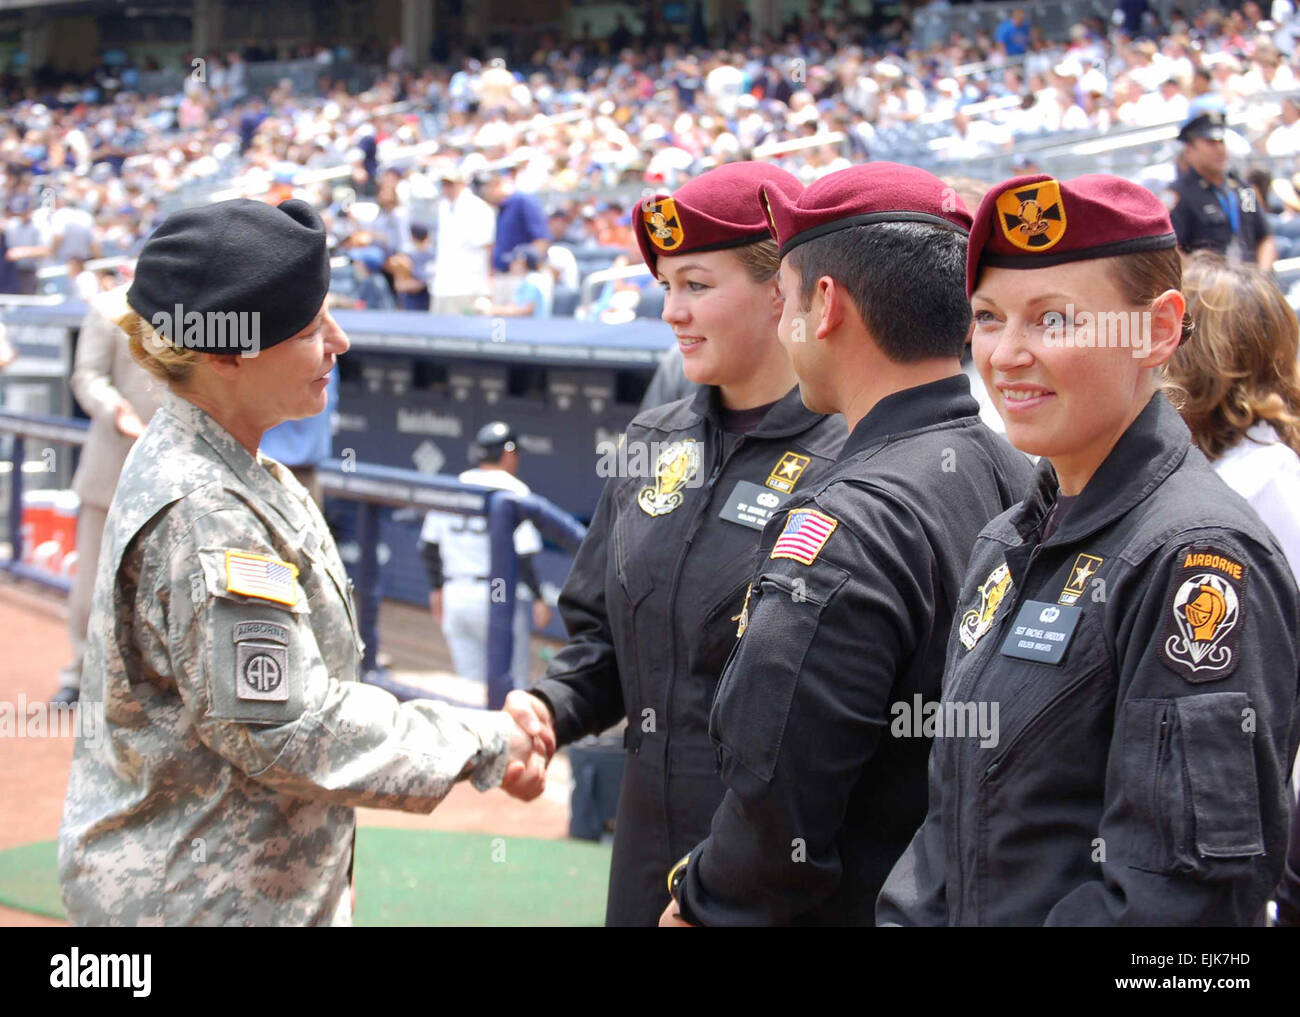 Gen. Ann E. Dunwoody, commander, U.S. Army Materiel Command, speaks with members of the U.S. Army Parachute Team, the Golden Knights, at Yankee Stadium prior to the Army Appreciation Game June 14. The Golden Knights jumped into the stadium, and Gen. Dunwoody threw out the first pitch to start the game in celebration of the Army's 234th Birthday. photo by Sgt. 1st Class Richard A. Guzman, New York City Recruiting Battalion Stock Photo